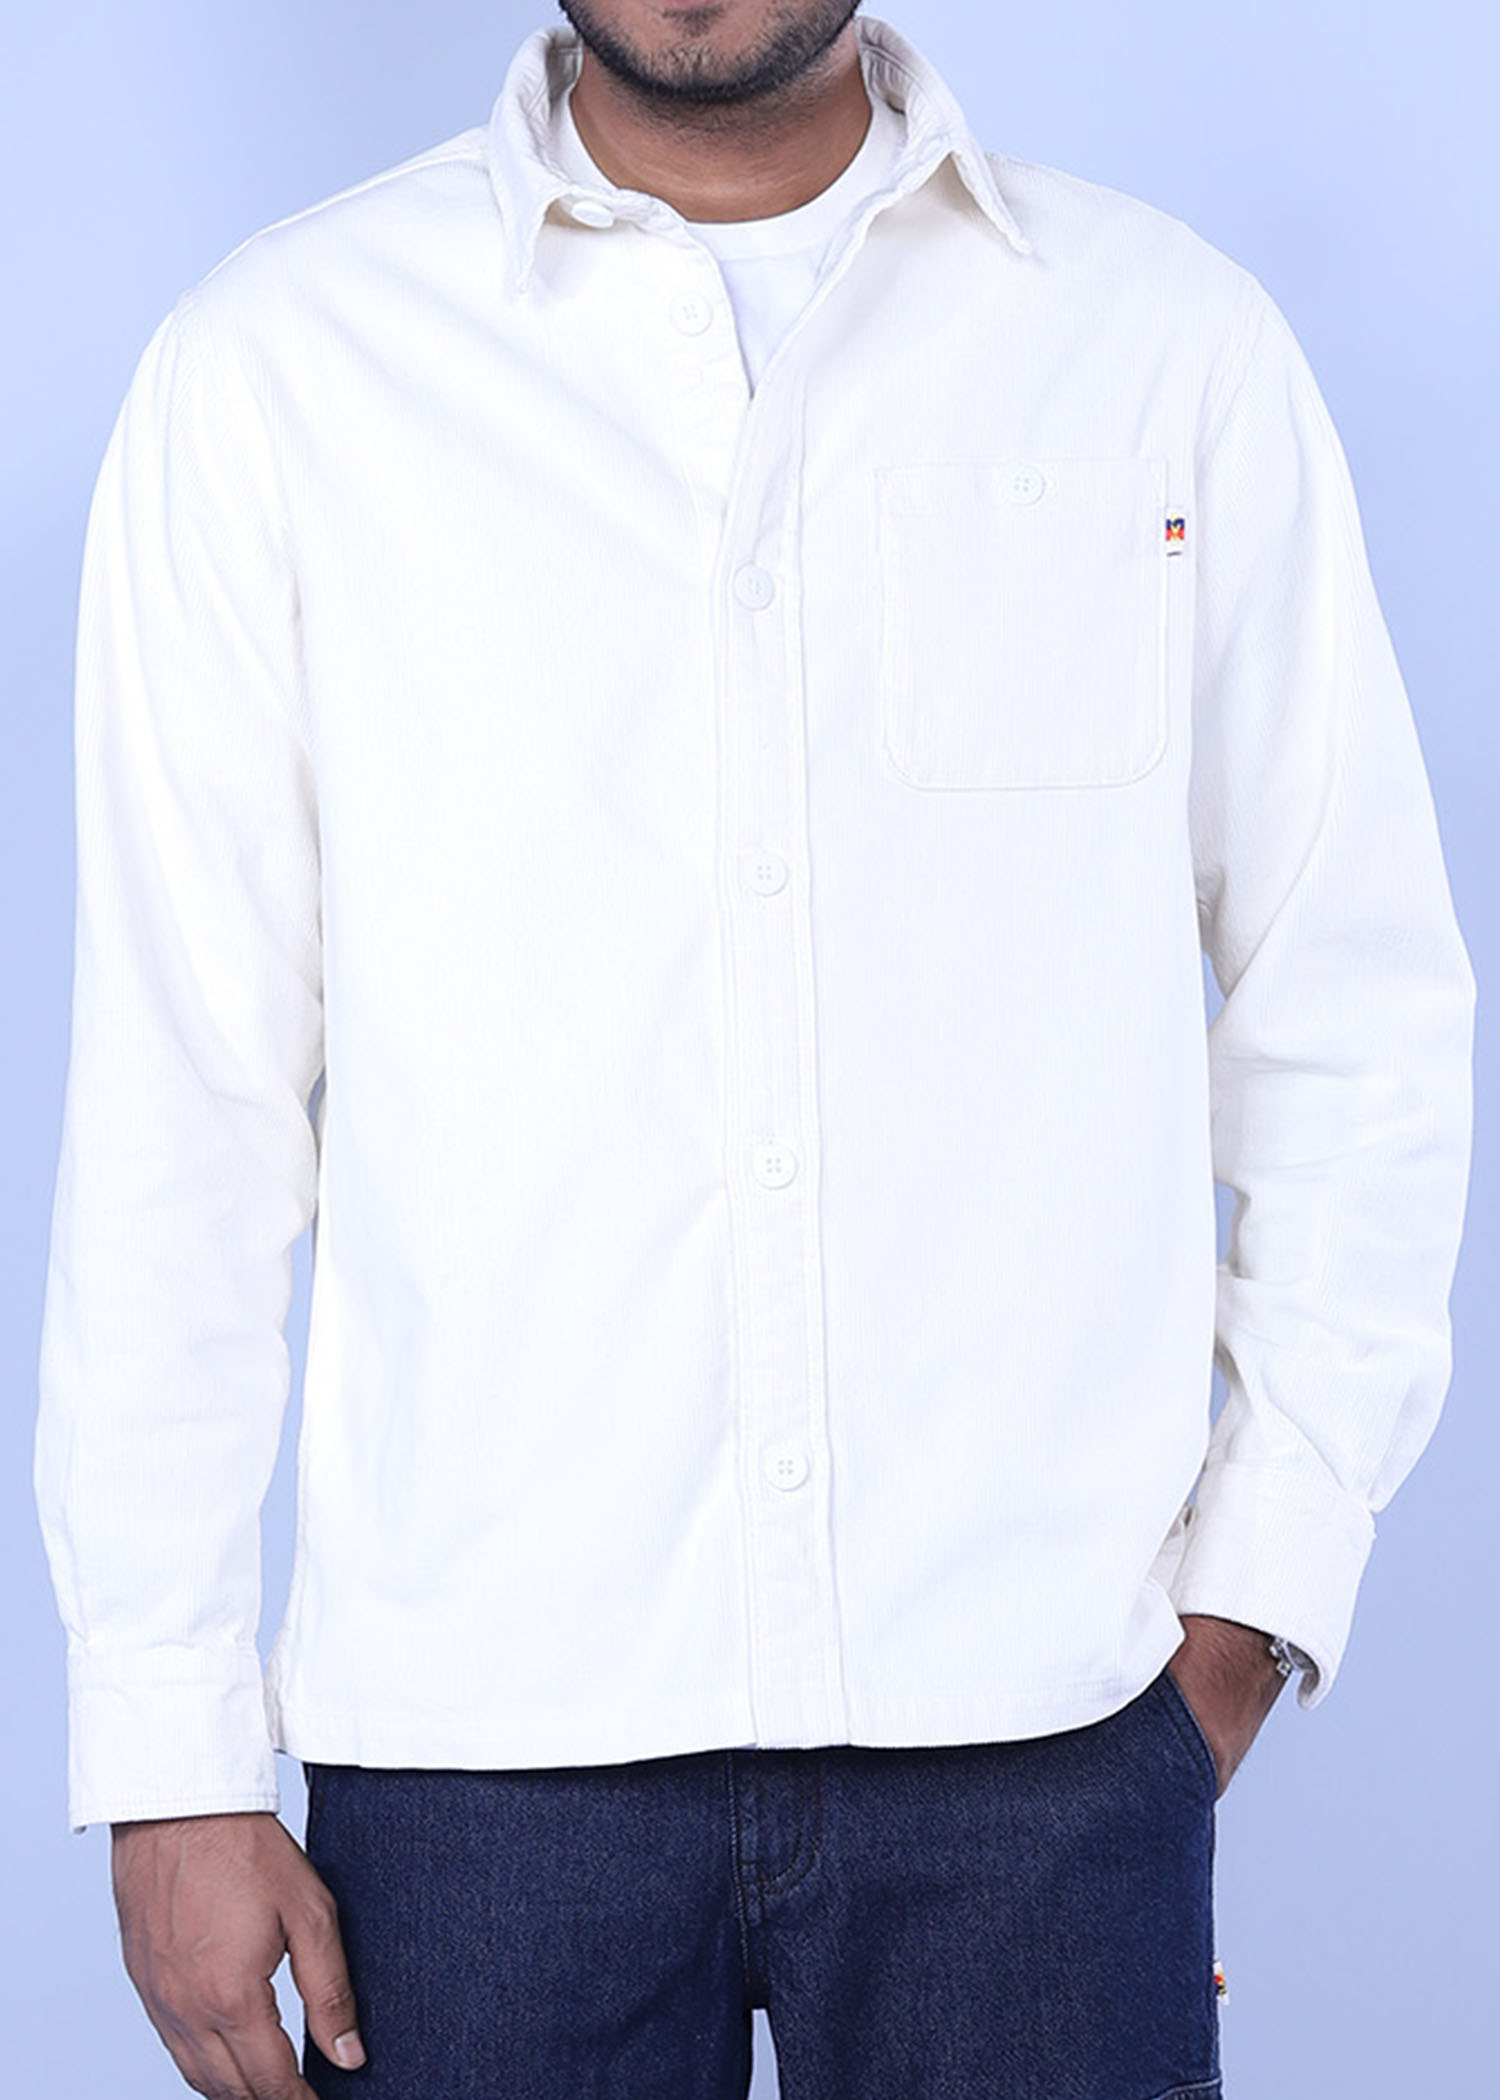 beijing corduroy shirt white color headcropped